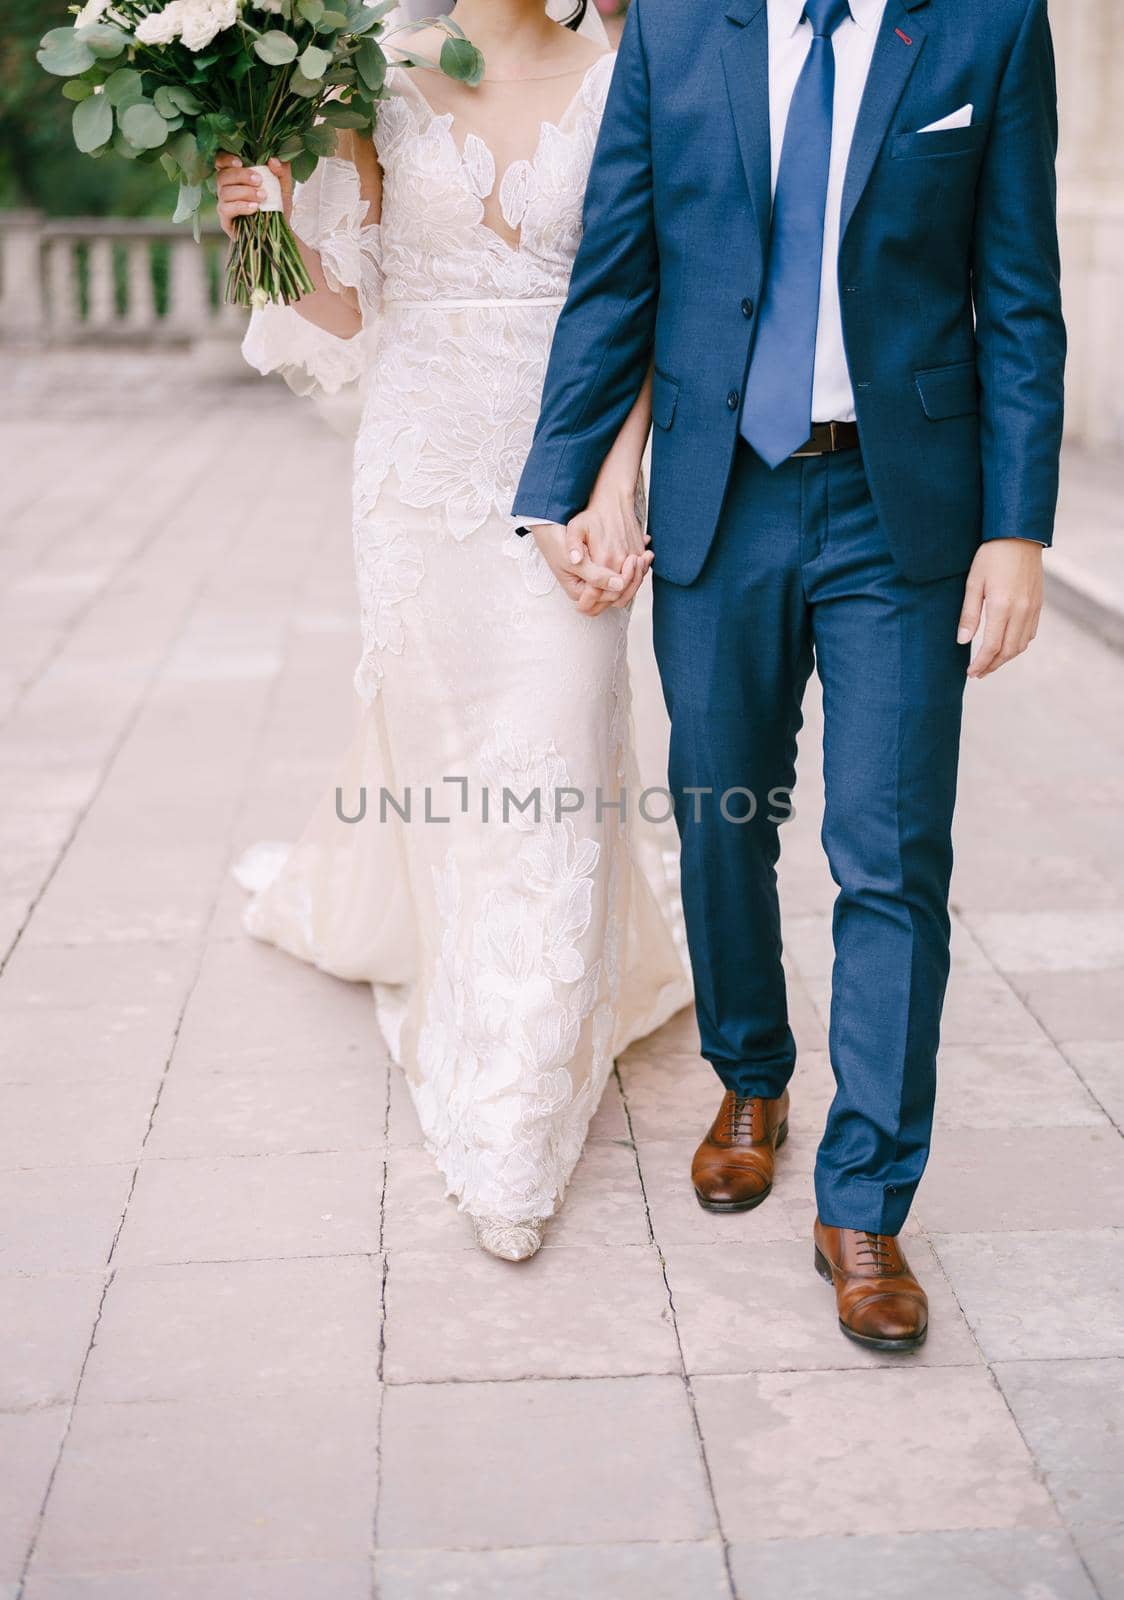 Bride and groom walk along the cobblestones holding hands. Close-up by Nadtochiy